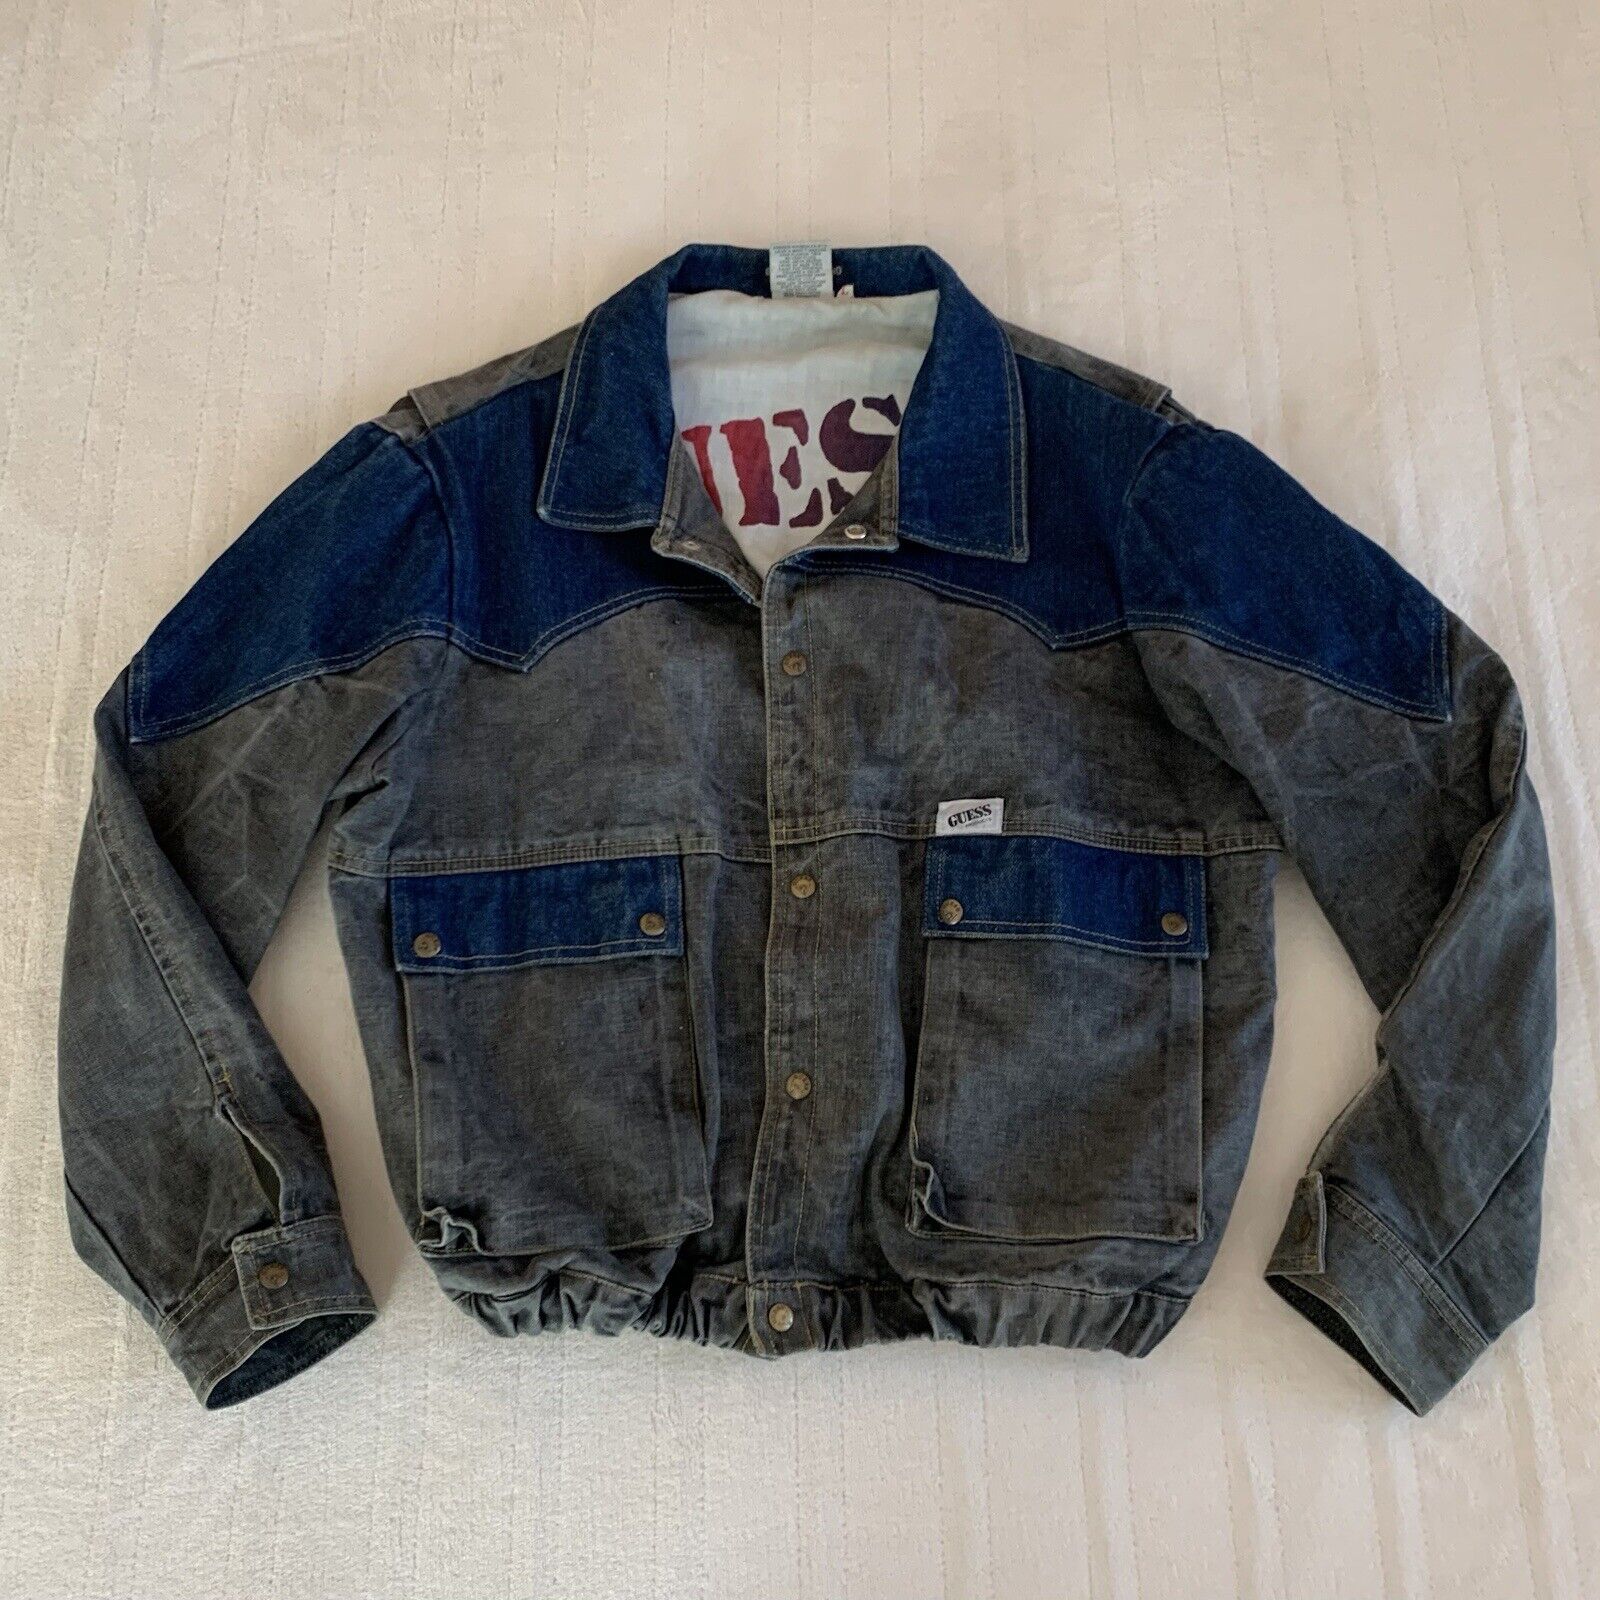 Back to the Future 1985 Denim Jacket 2018 Update | Page 24 | RPF ...